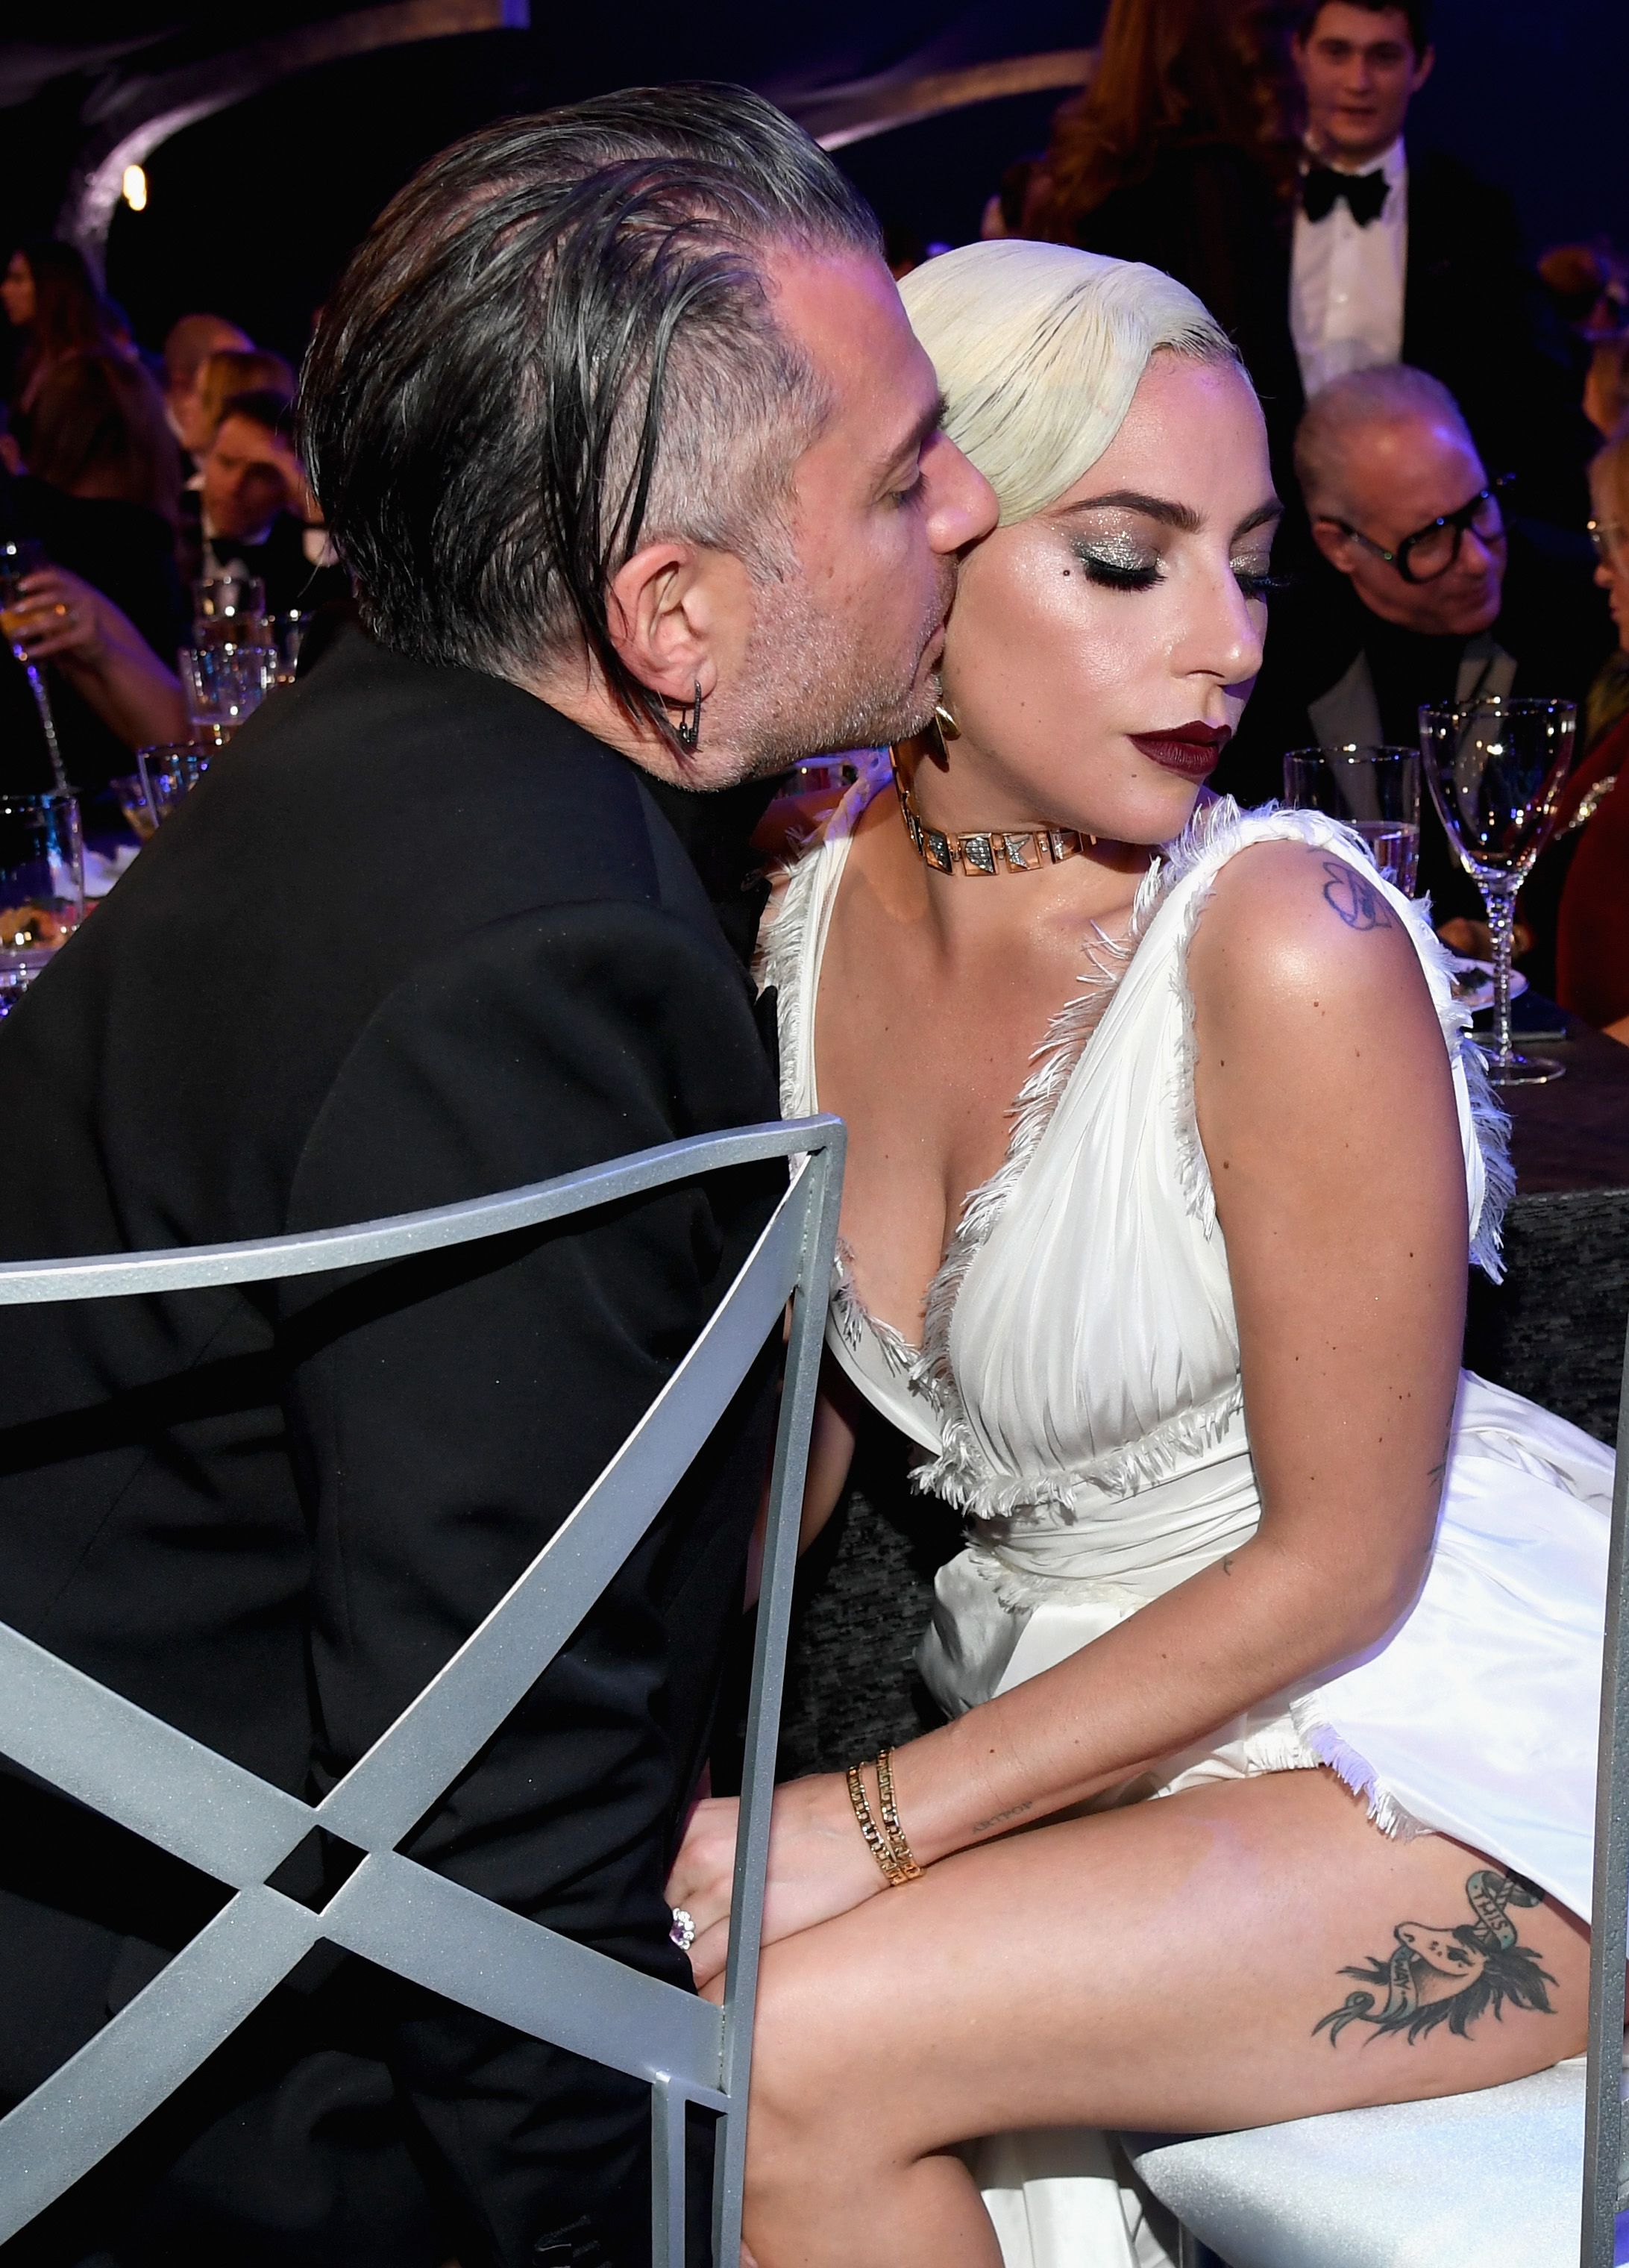 Lady Gaga Reportedly Broke Up with Christian Carino Because He Was Jealous and Texted Her Too Much